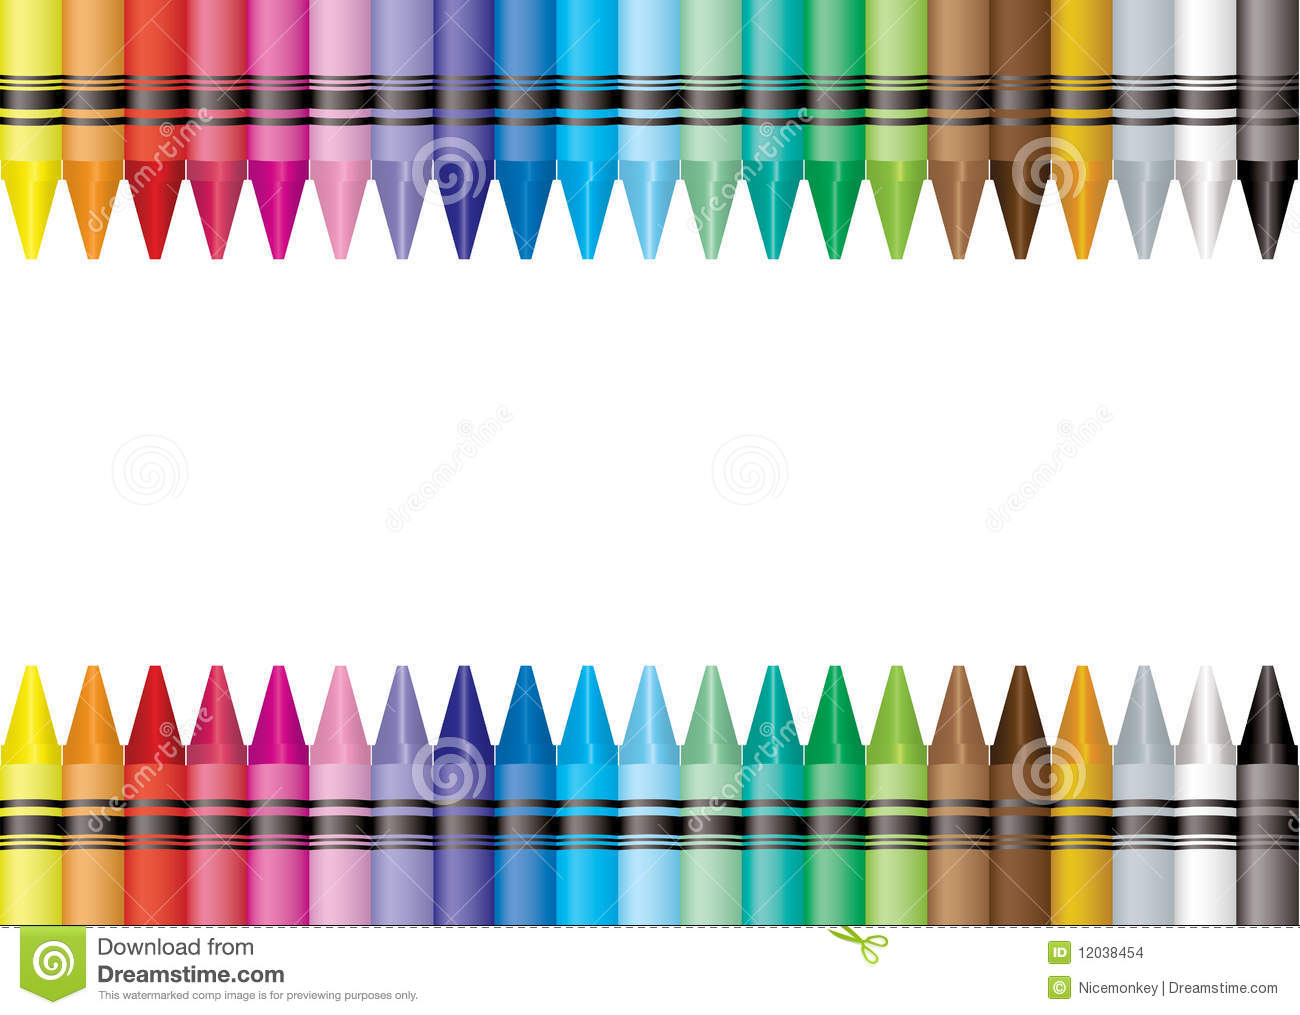 Pin Abstract Room Crayons Theory HD Wallpaper Color Palette Tags On